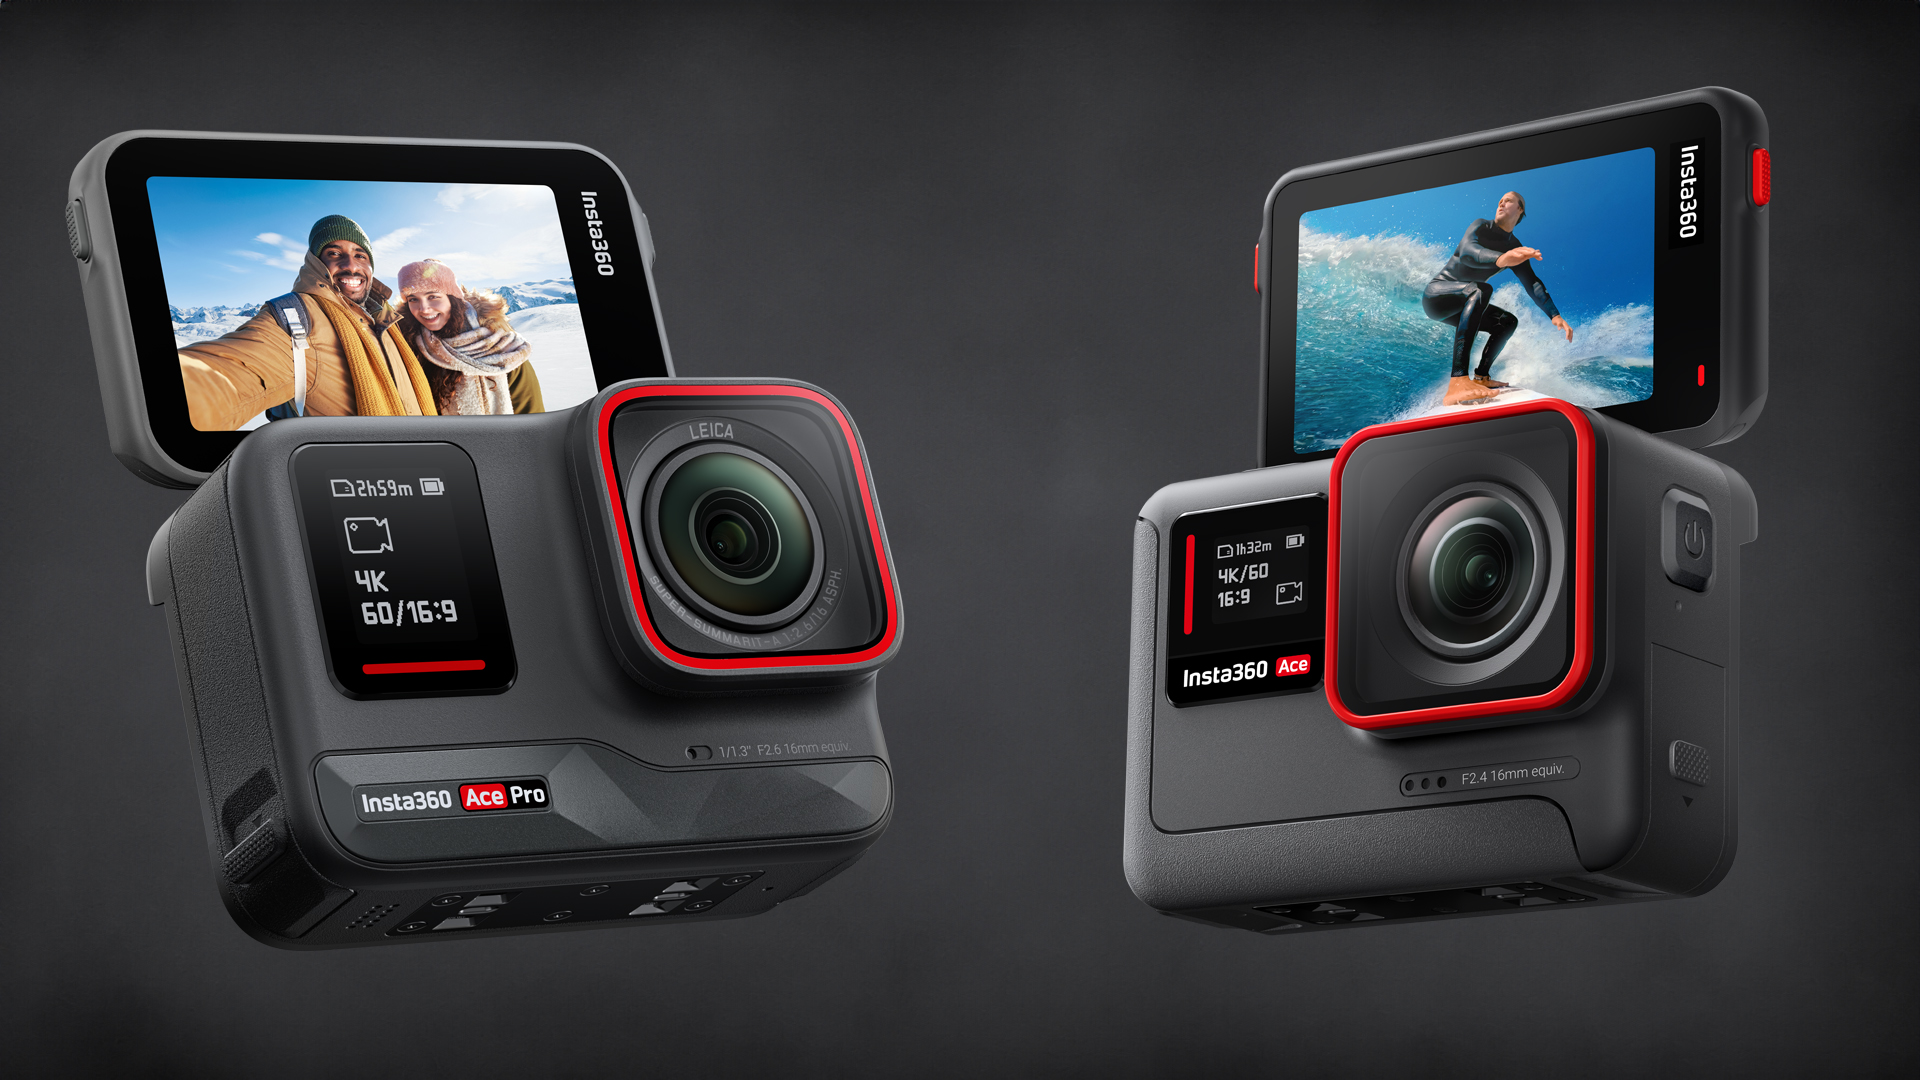 Insta360 partners with Leica for Ace Pro action camera - HIGHXTAR.